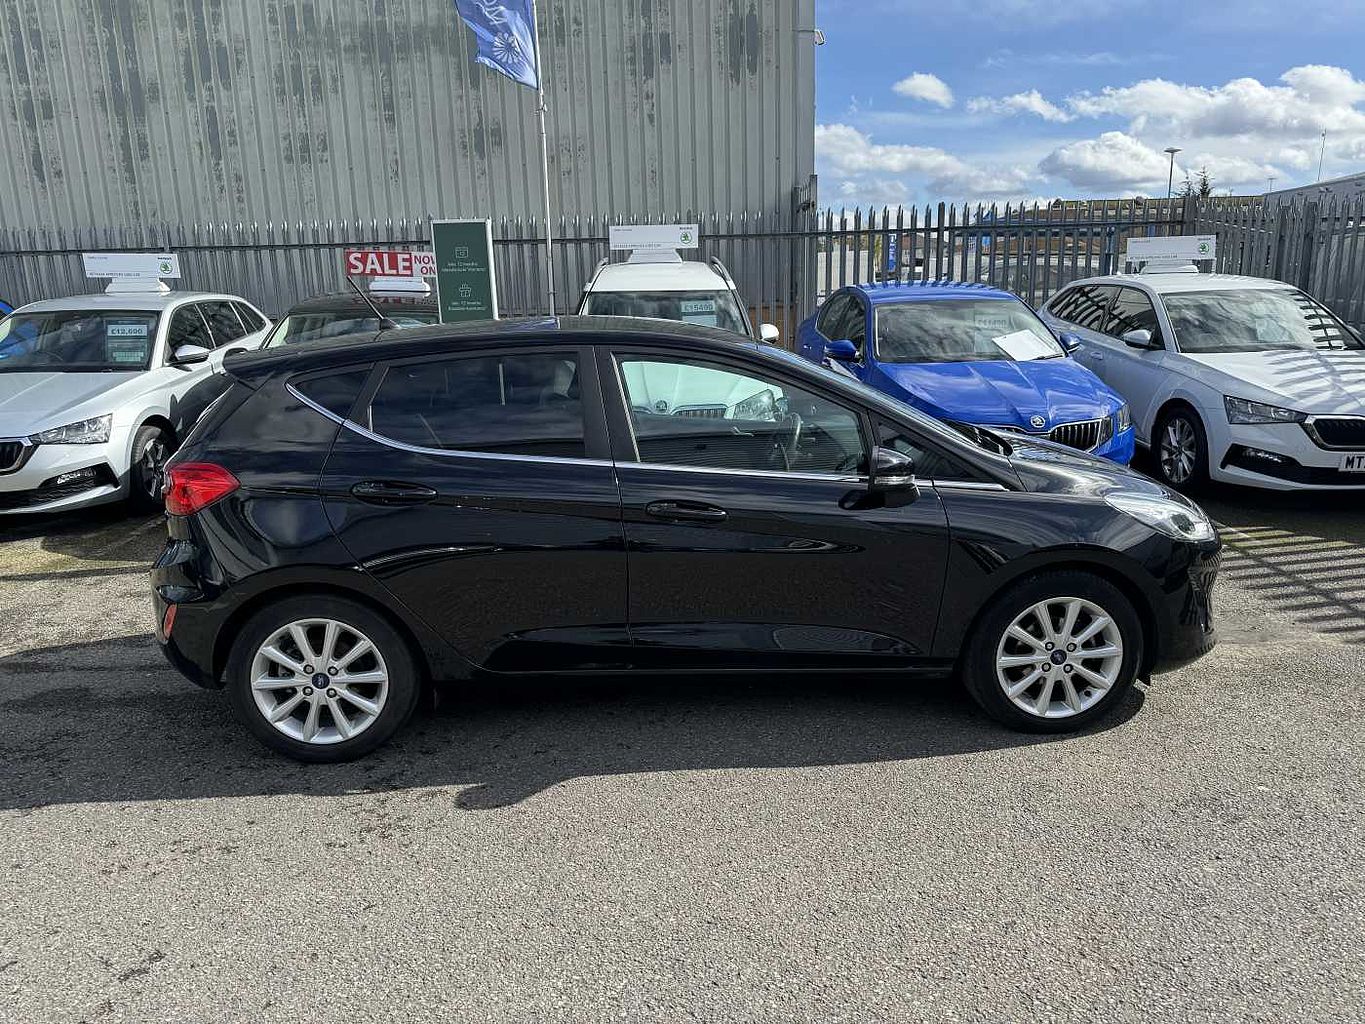 Ford Fiesta 1.0 (125ps) Titanium EcoBoost (S/S) 5-Dr H